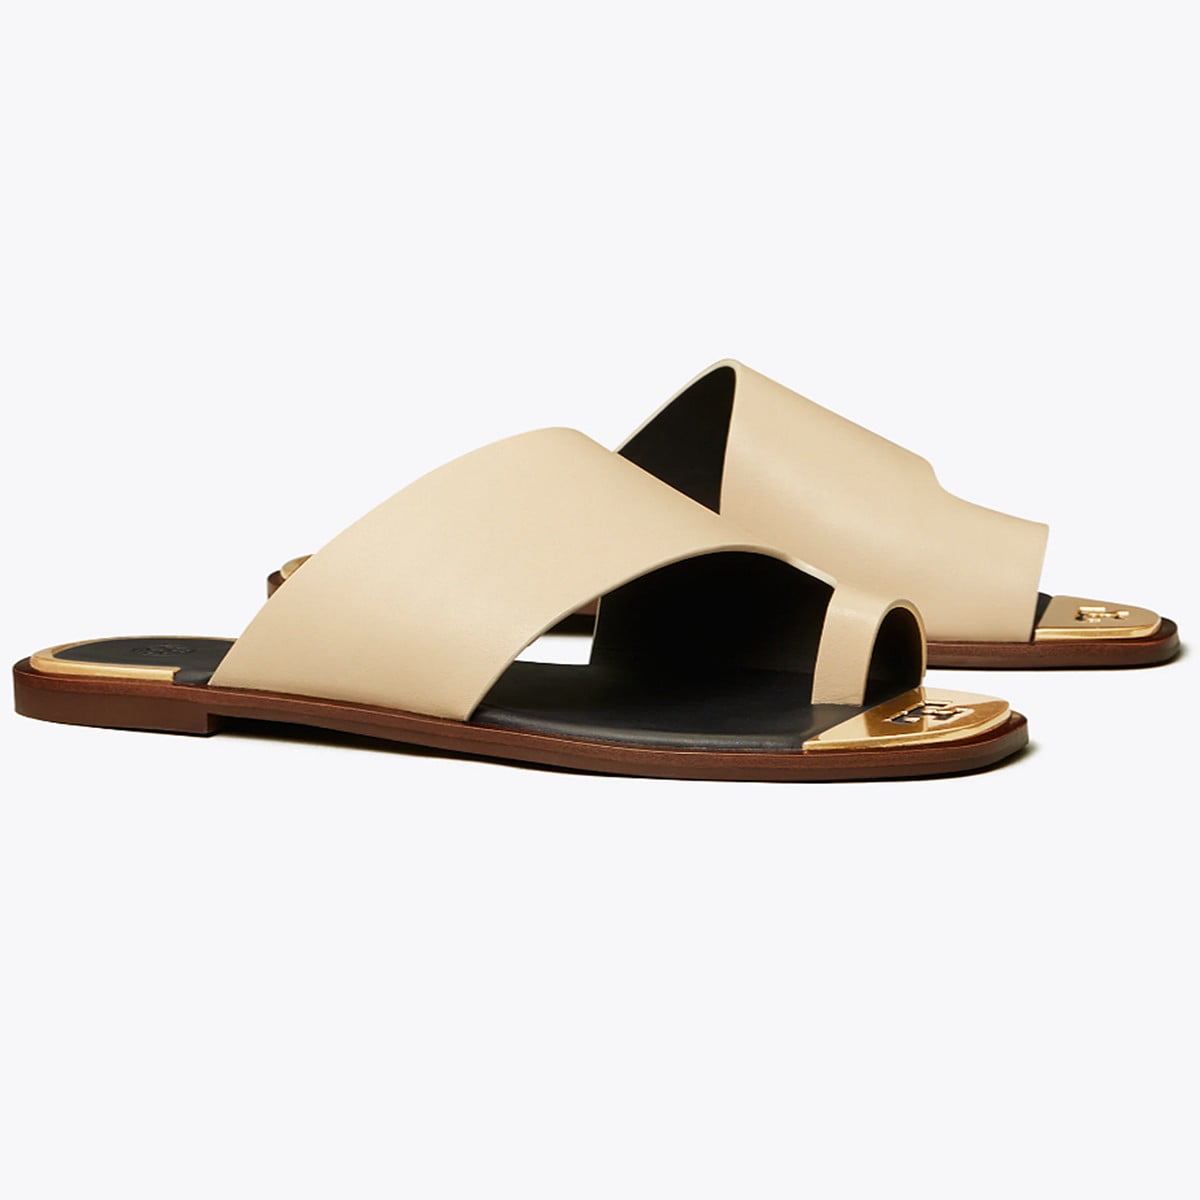 Tory Burch Selby Toe-Ring Slide